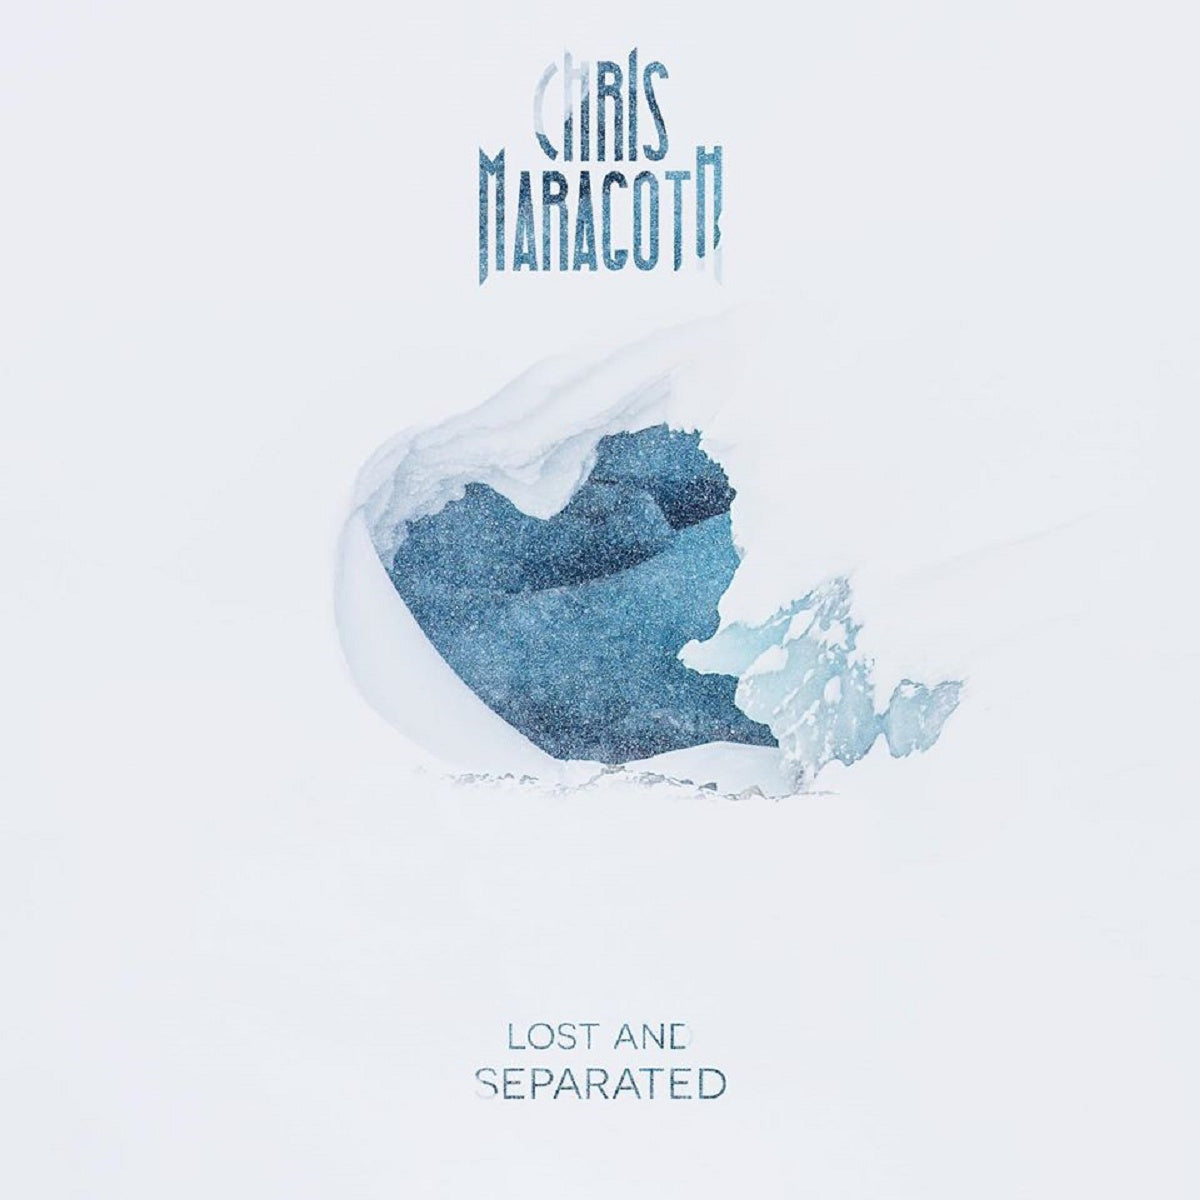 Chris Maragoth – ‘Lost and Separated’